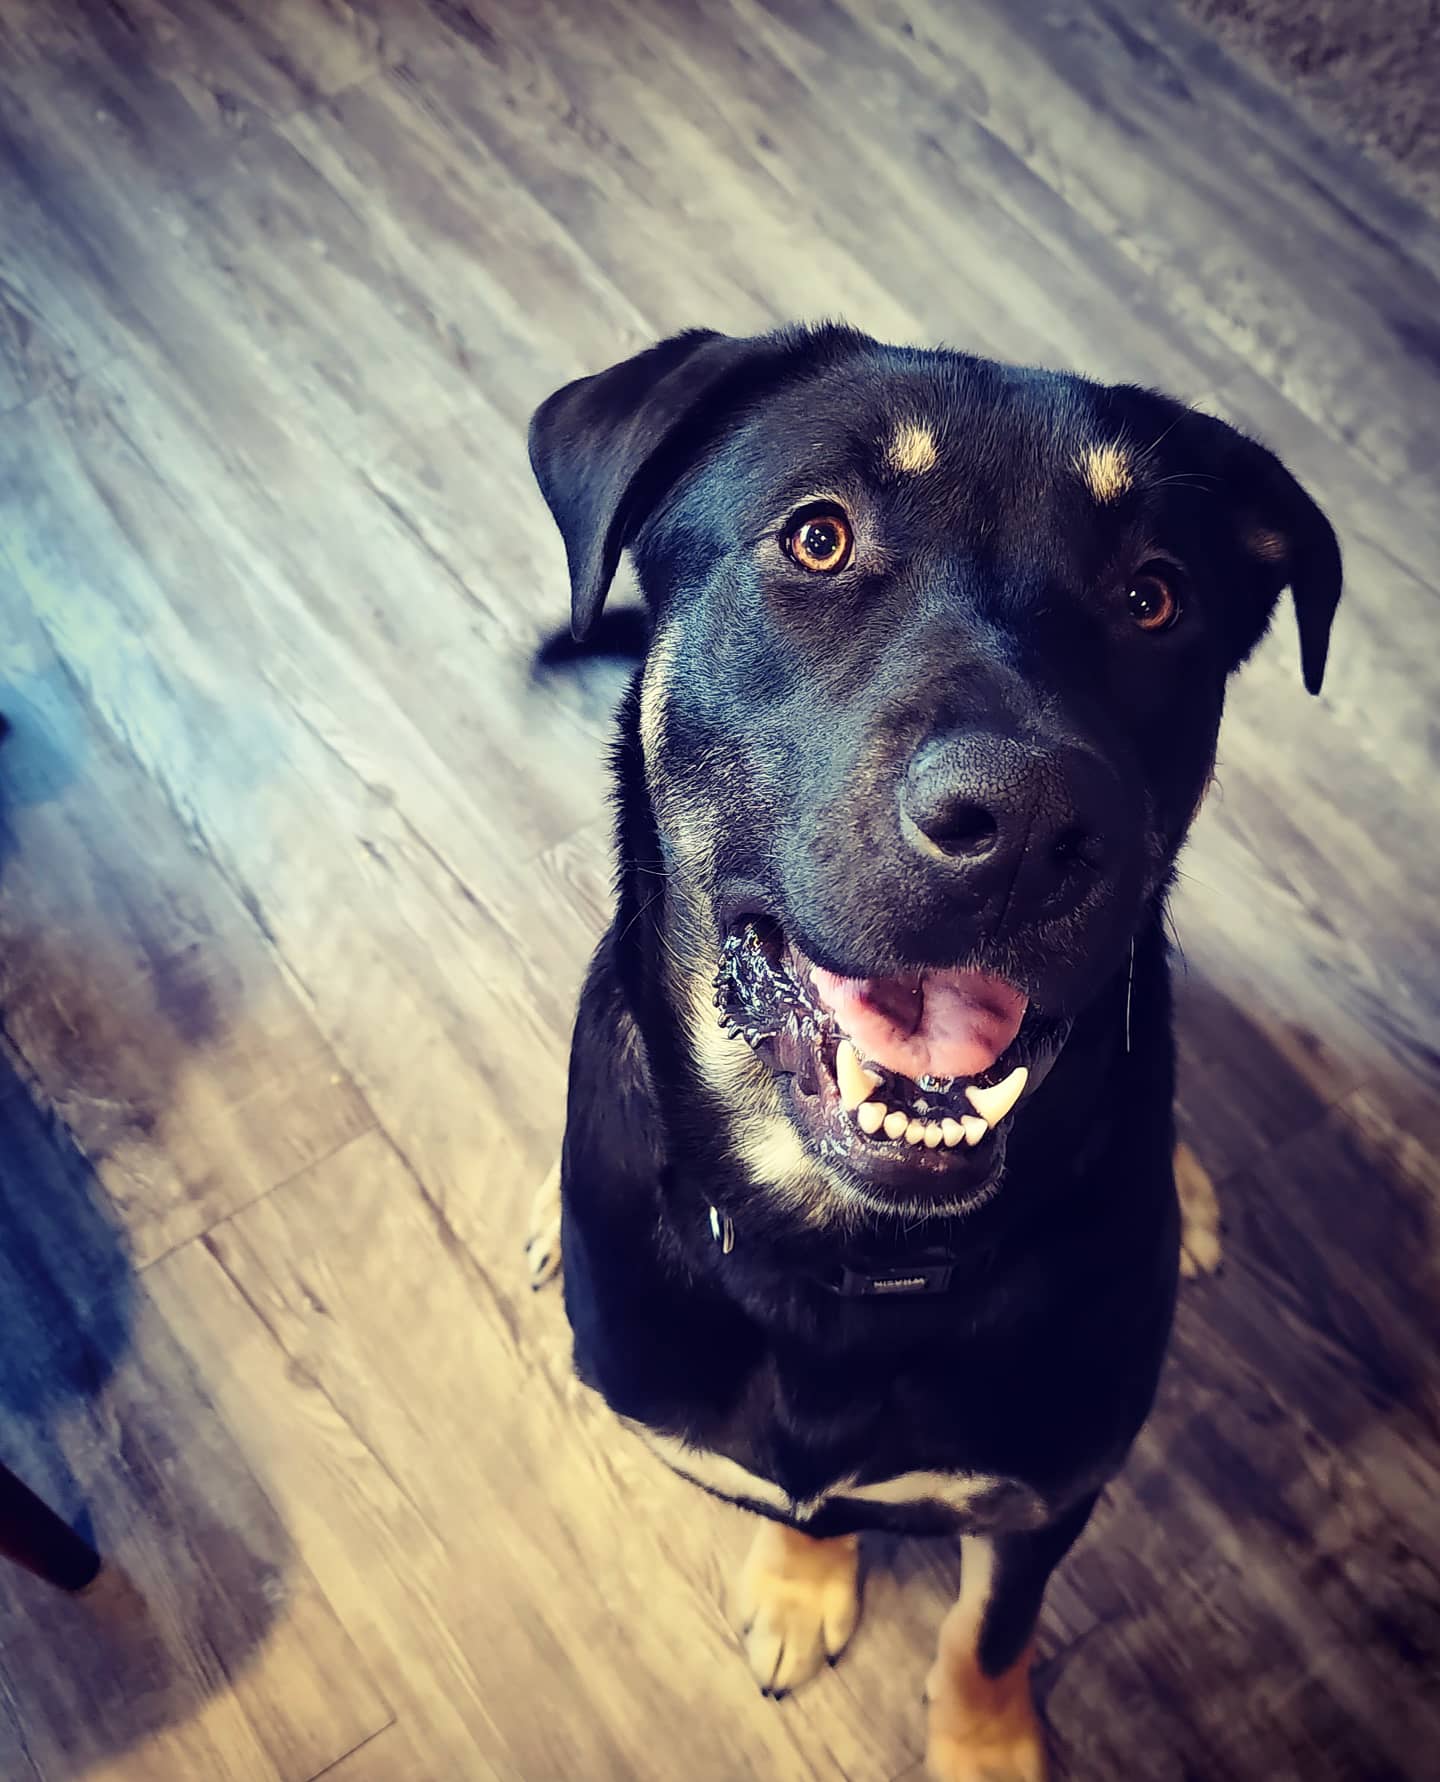 A black and brown medium-sized dog smiles up at the camera